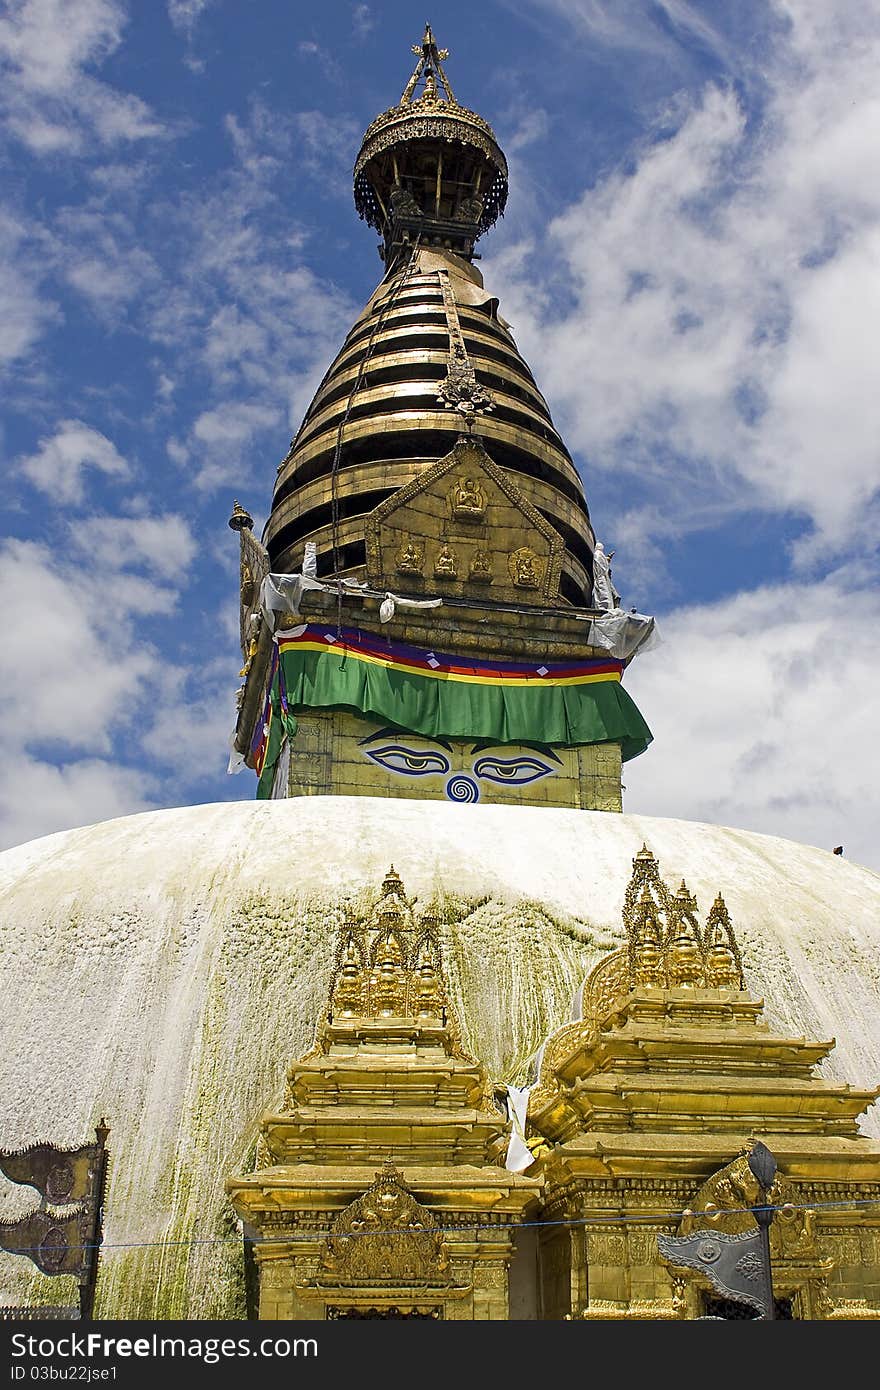 Swayambhunath is an ancient religious complex atop a hill in the Kathmandu Valley, Nepal. It is also known as the Monkey Temple. Swayambhunath is an ancient religious complex atop a hill in the Kathmandu Valley, Nepal. It is also known as the Monkey Temple